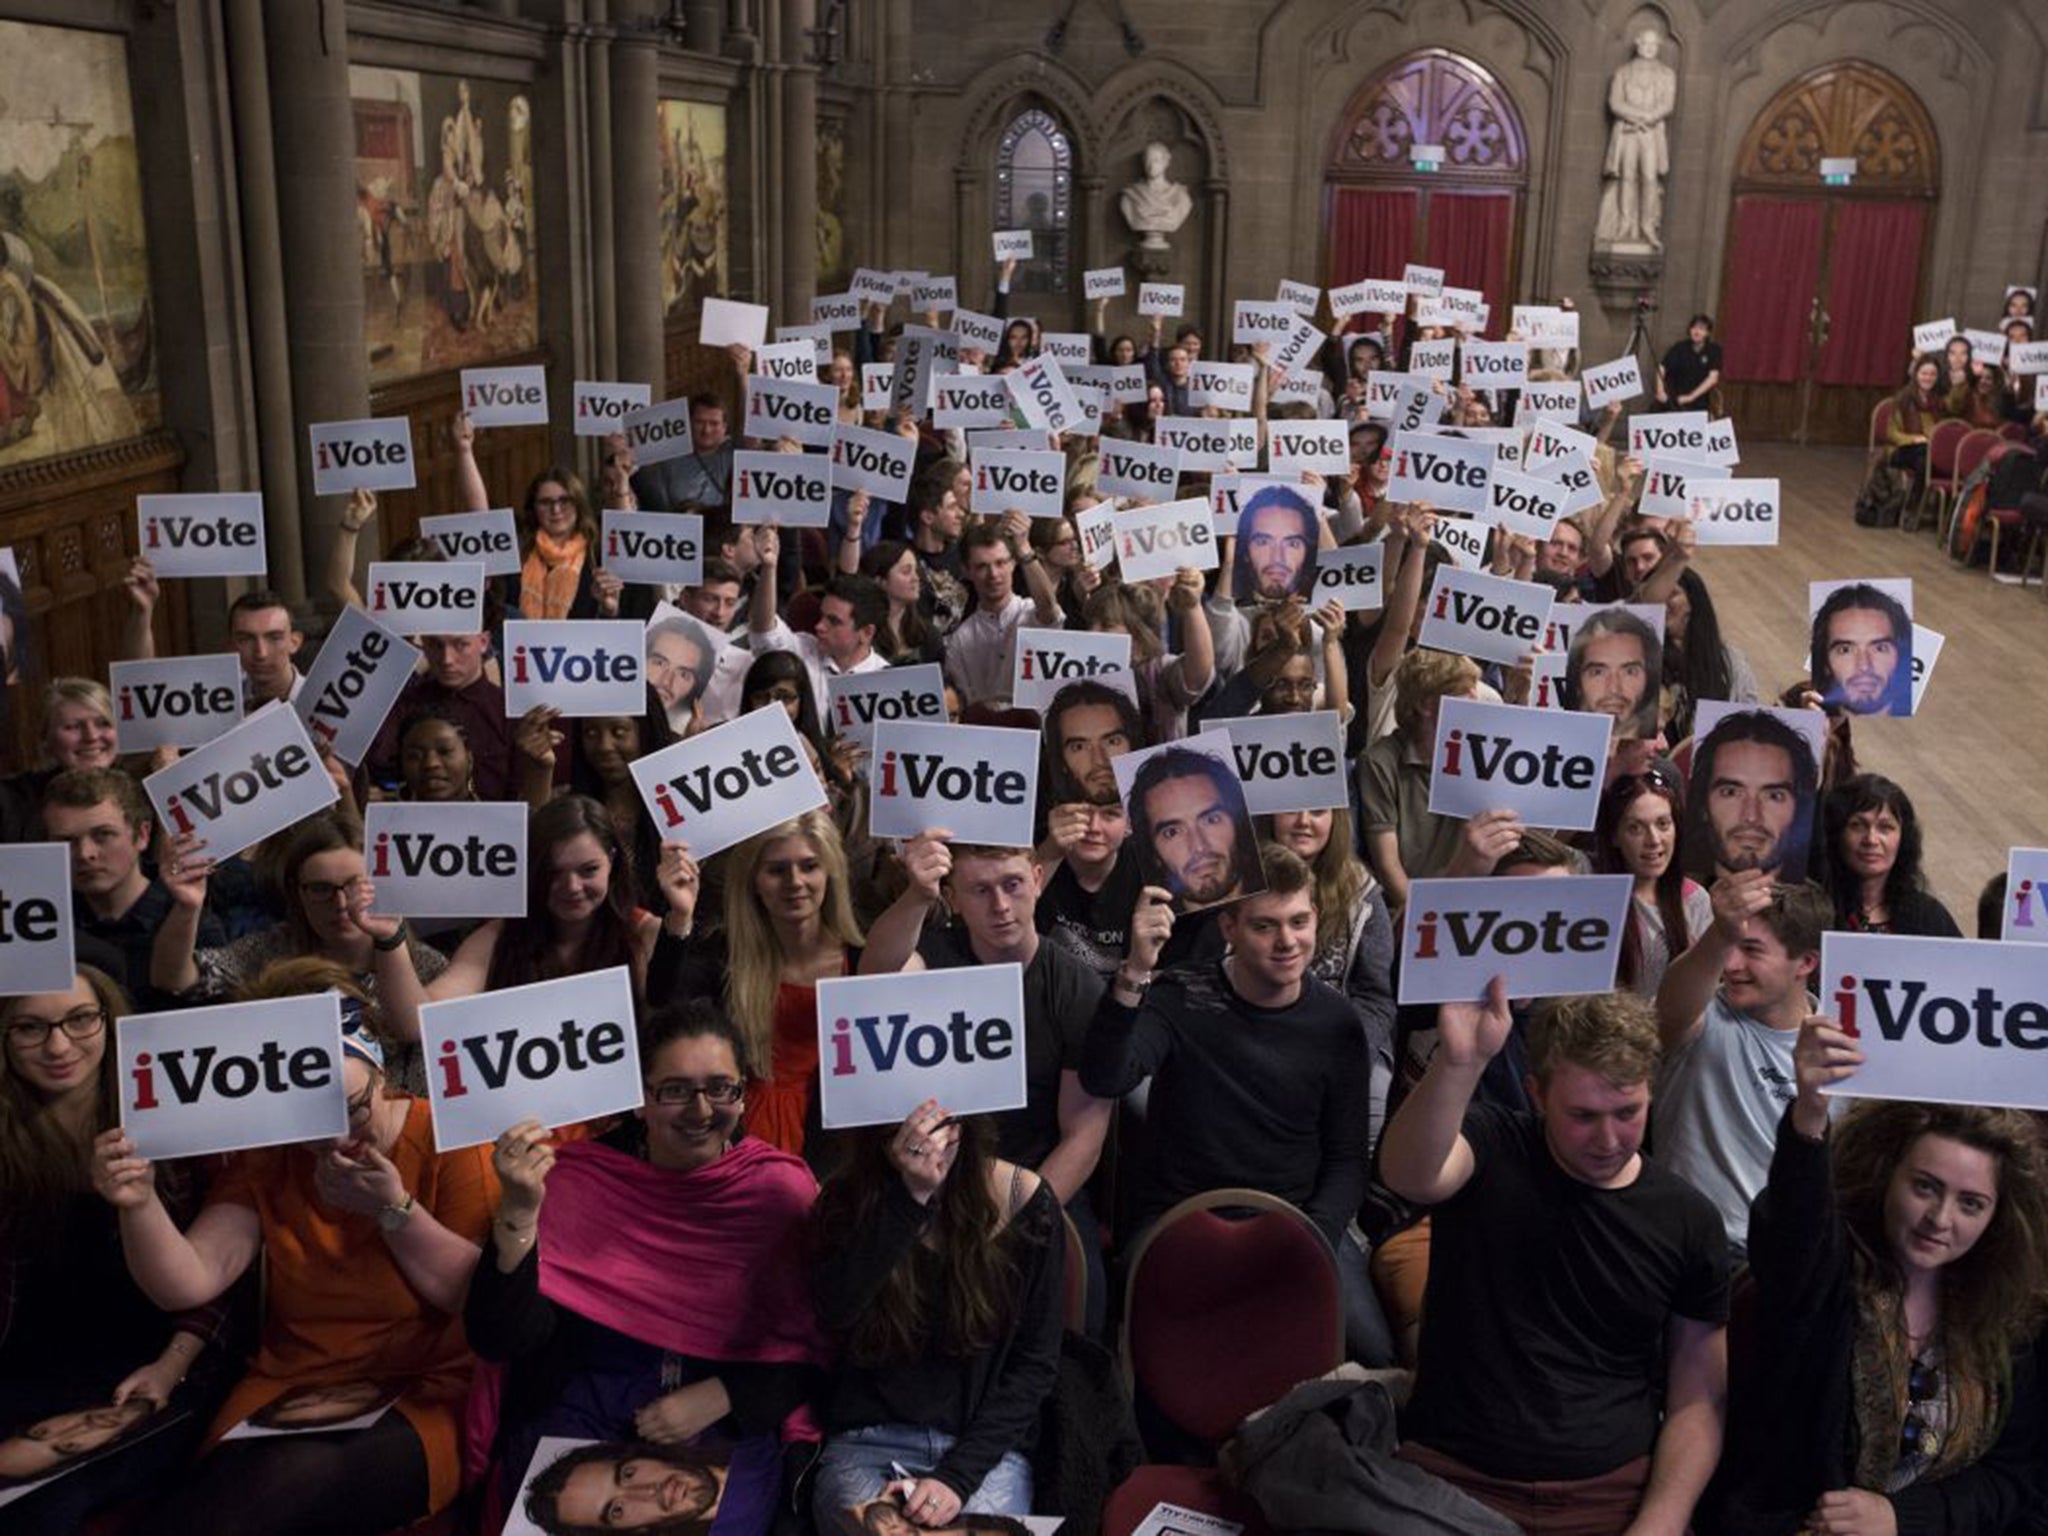 The audience expressing their opinion by showing placards at Manchester Town Hall during the Independent's idebate event for students